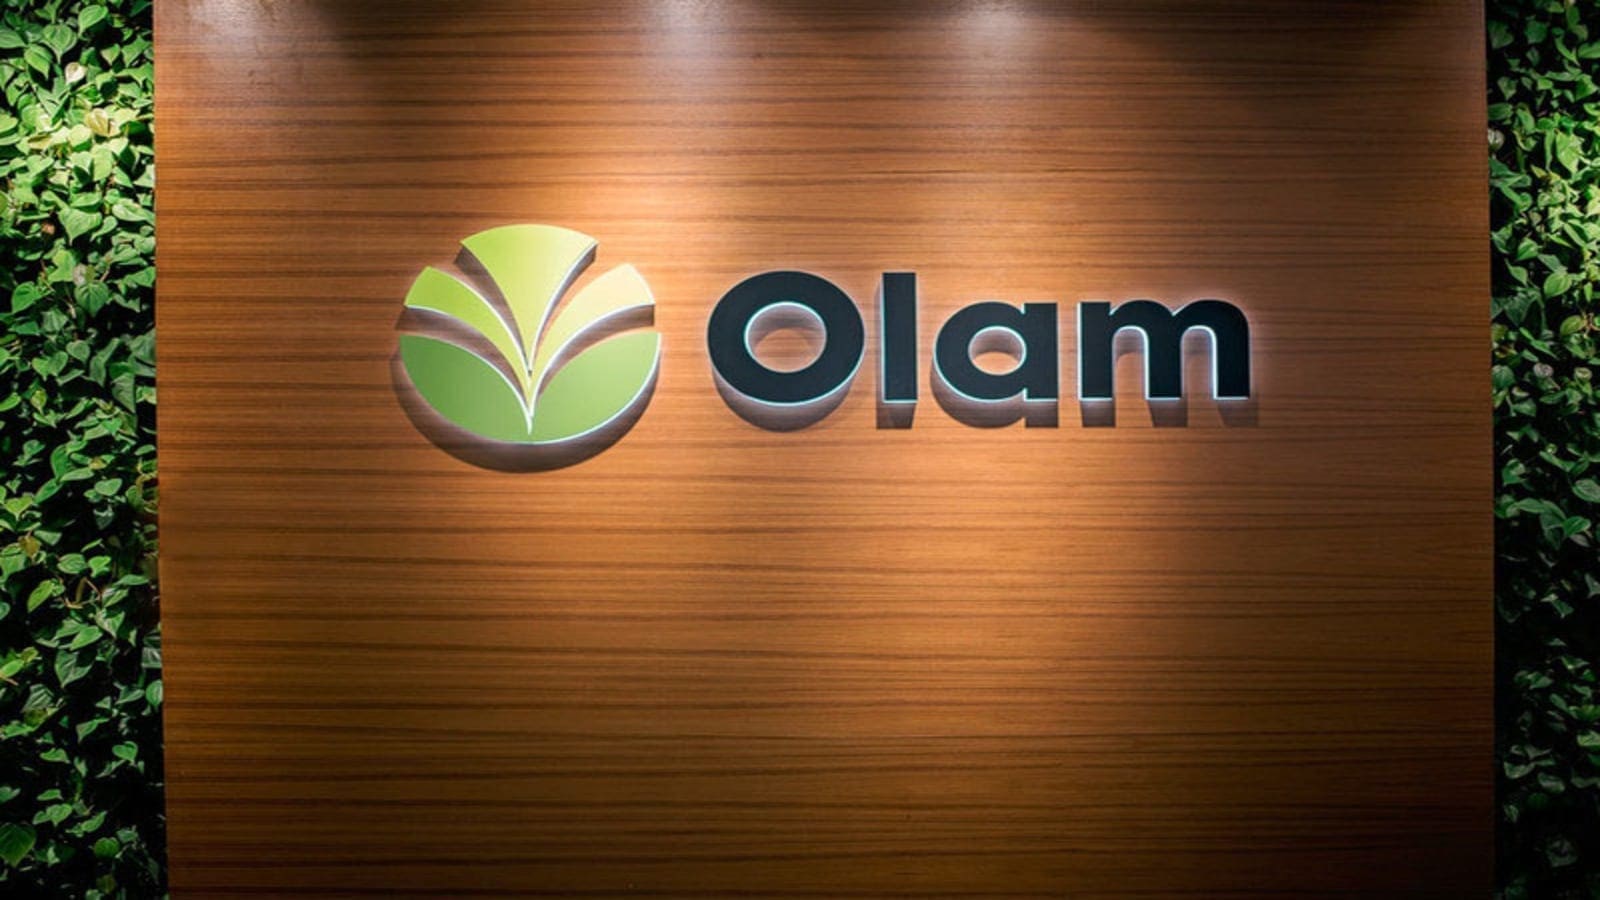 Olam secures US$1.45Bn financing facility to bolster its sustainability sourcing platform